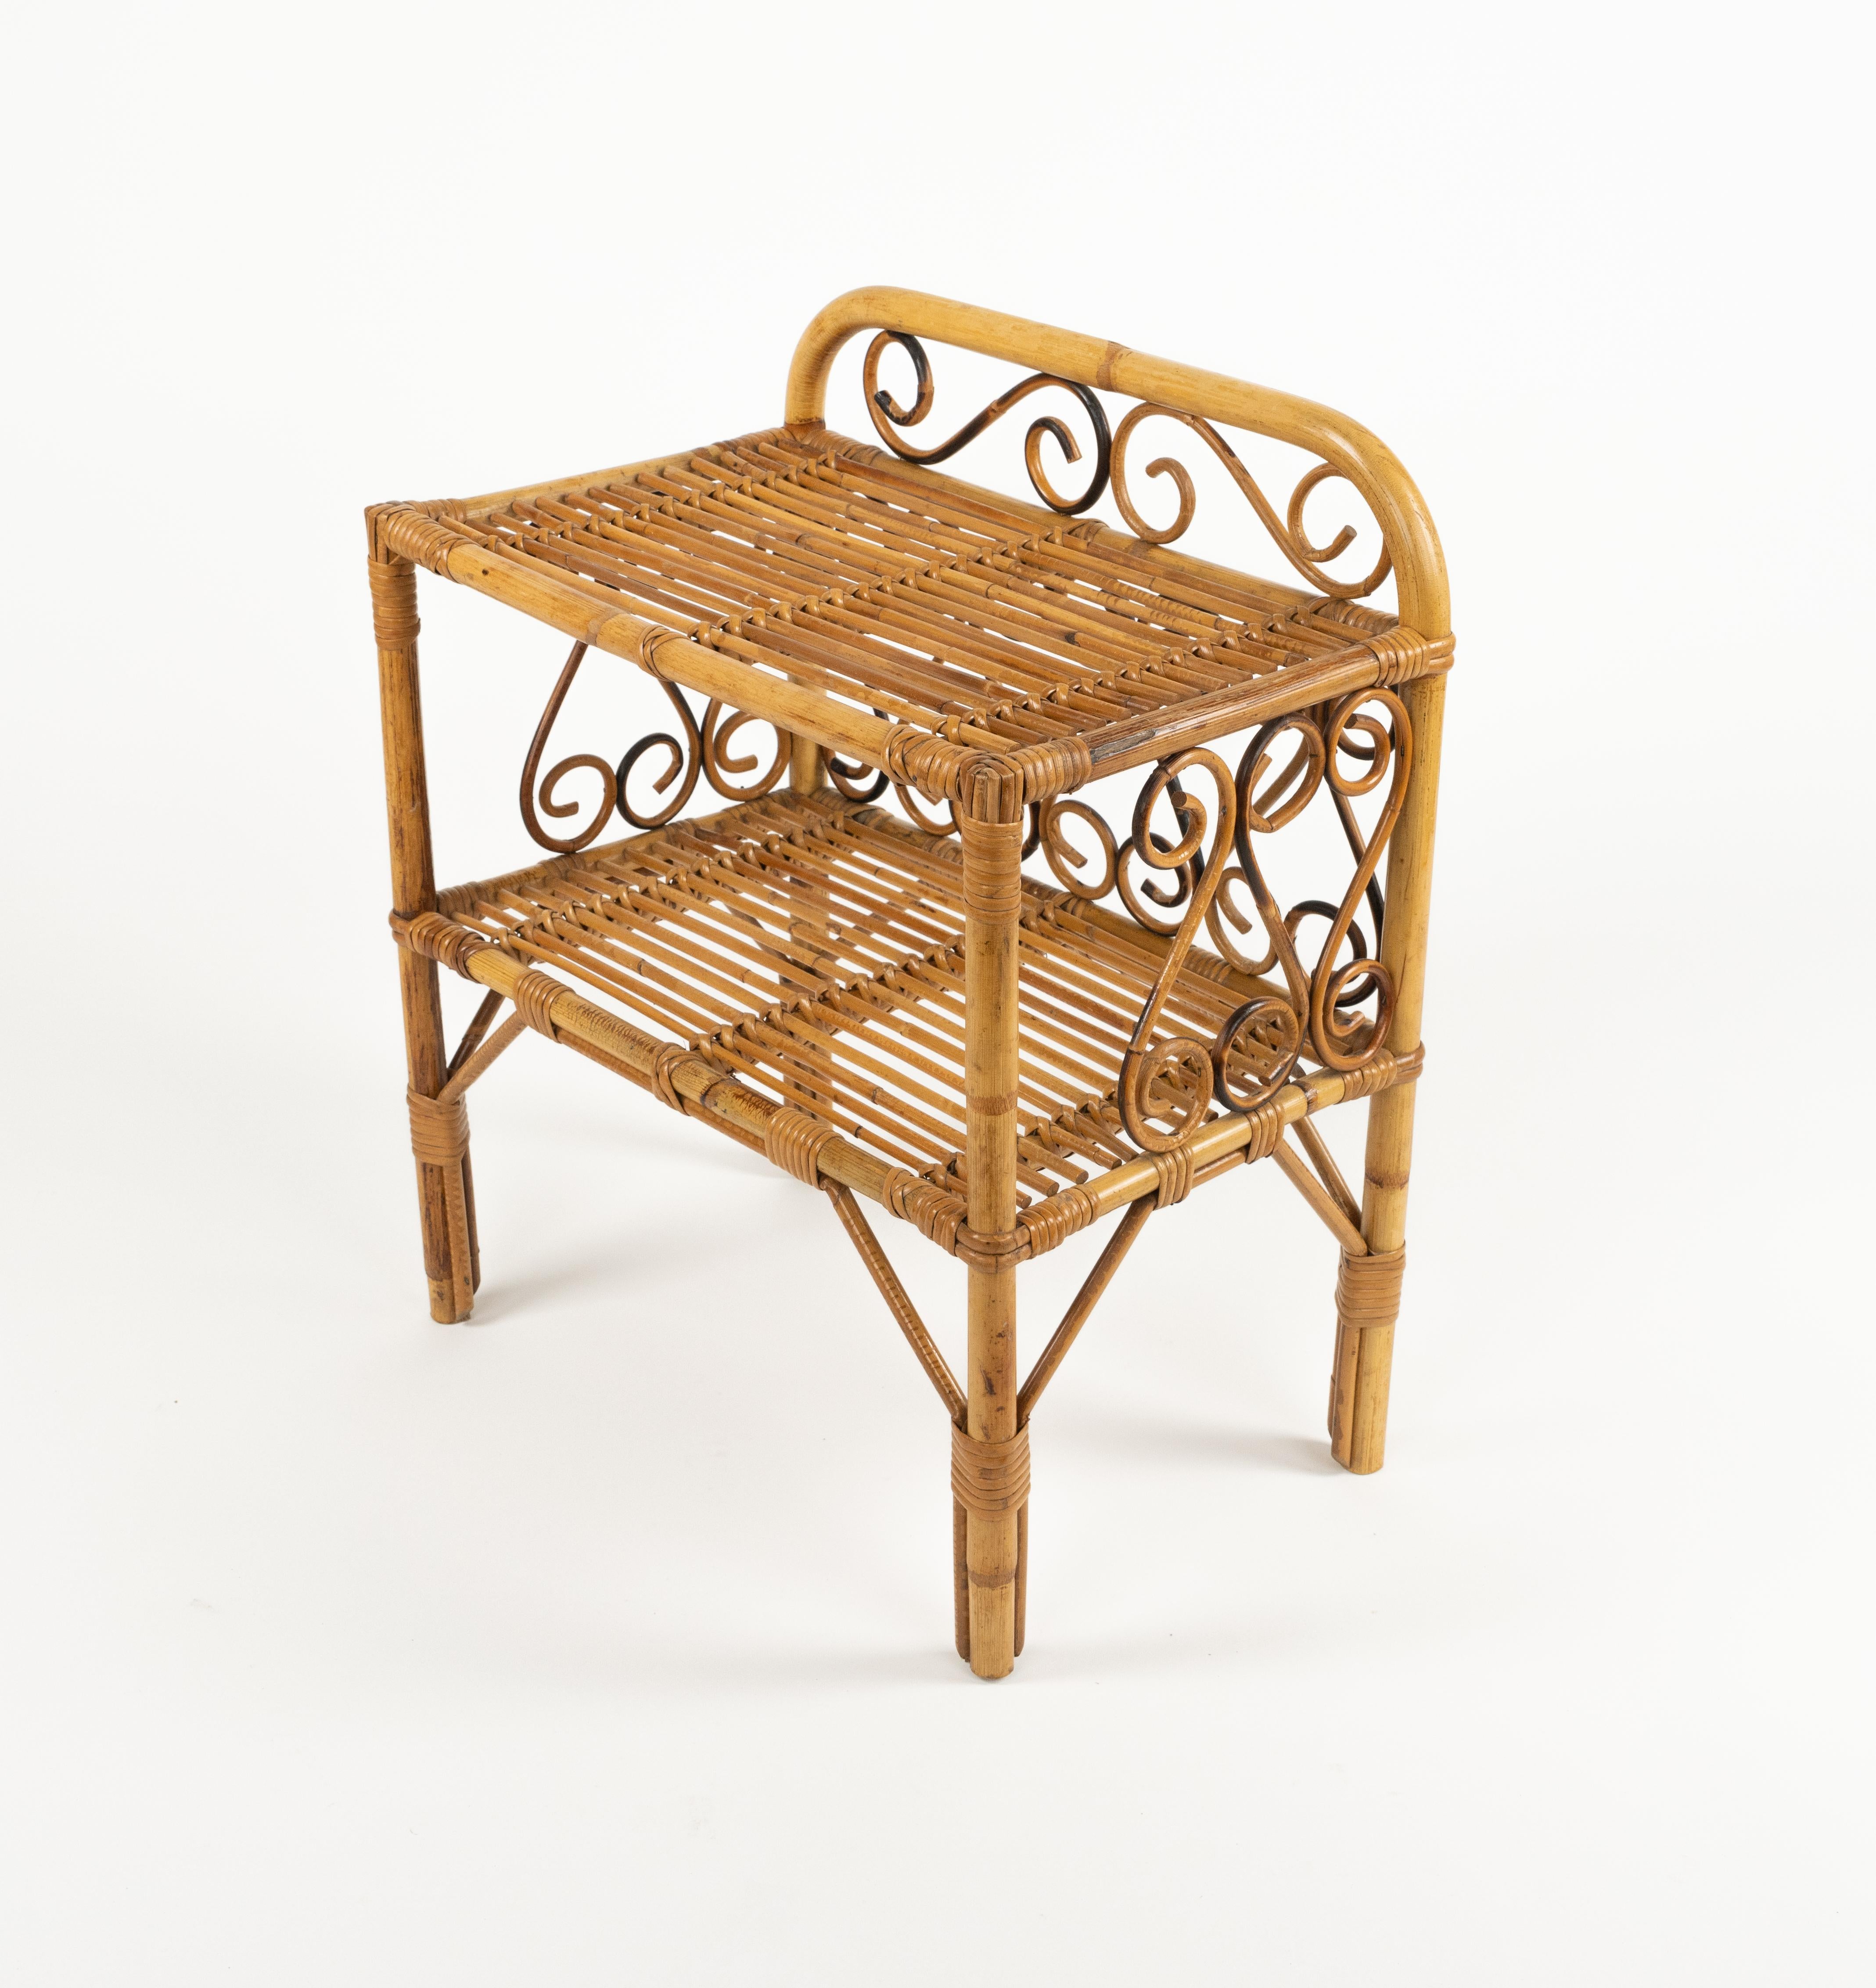 Midcentury Bamboo and Rattan Side Table Franco Albini Style, Italy 1960s For Sale 4